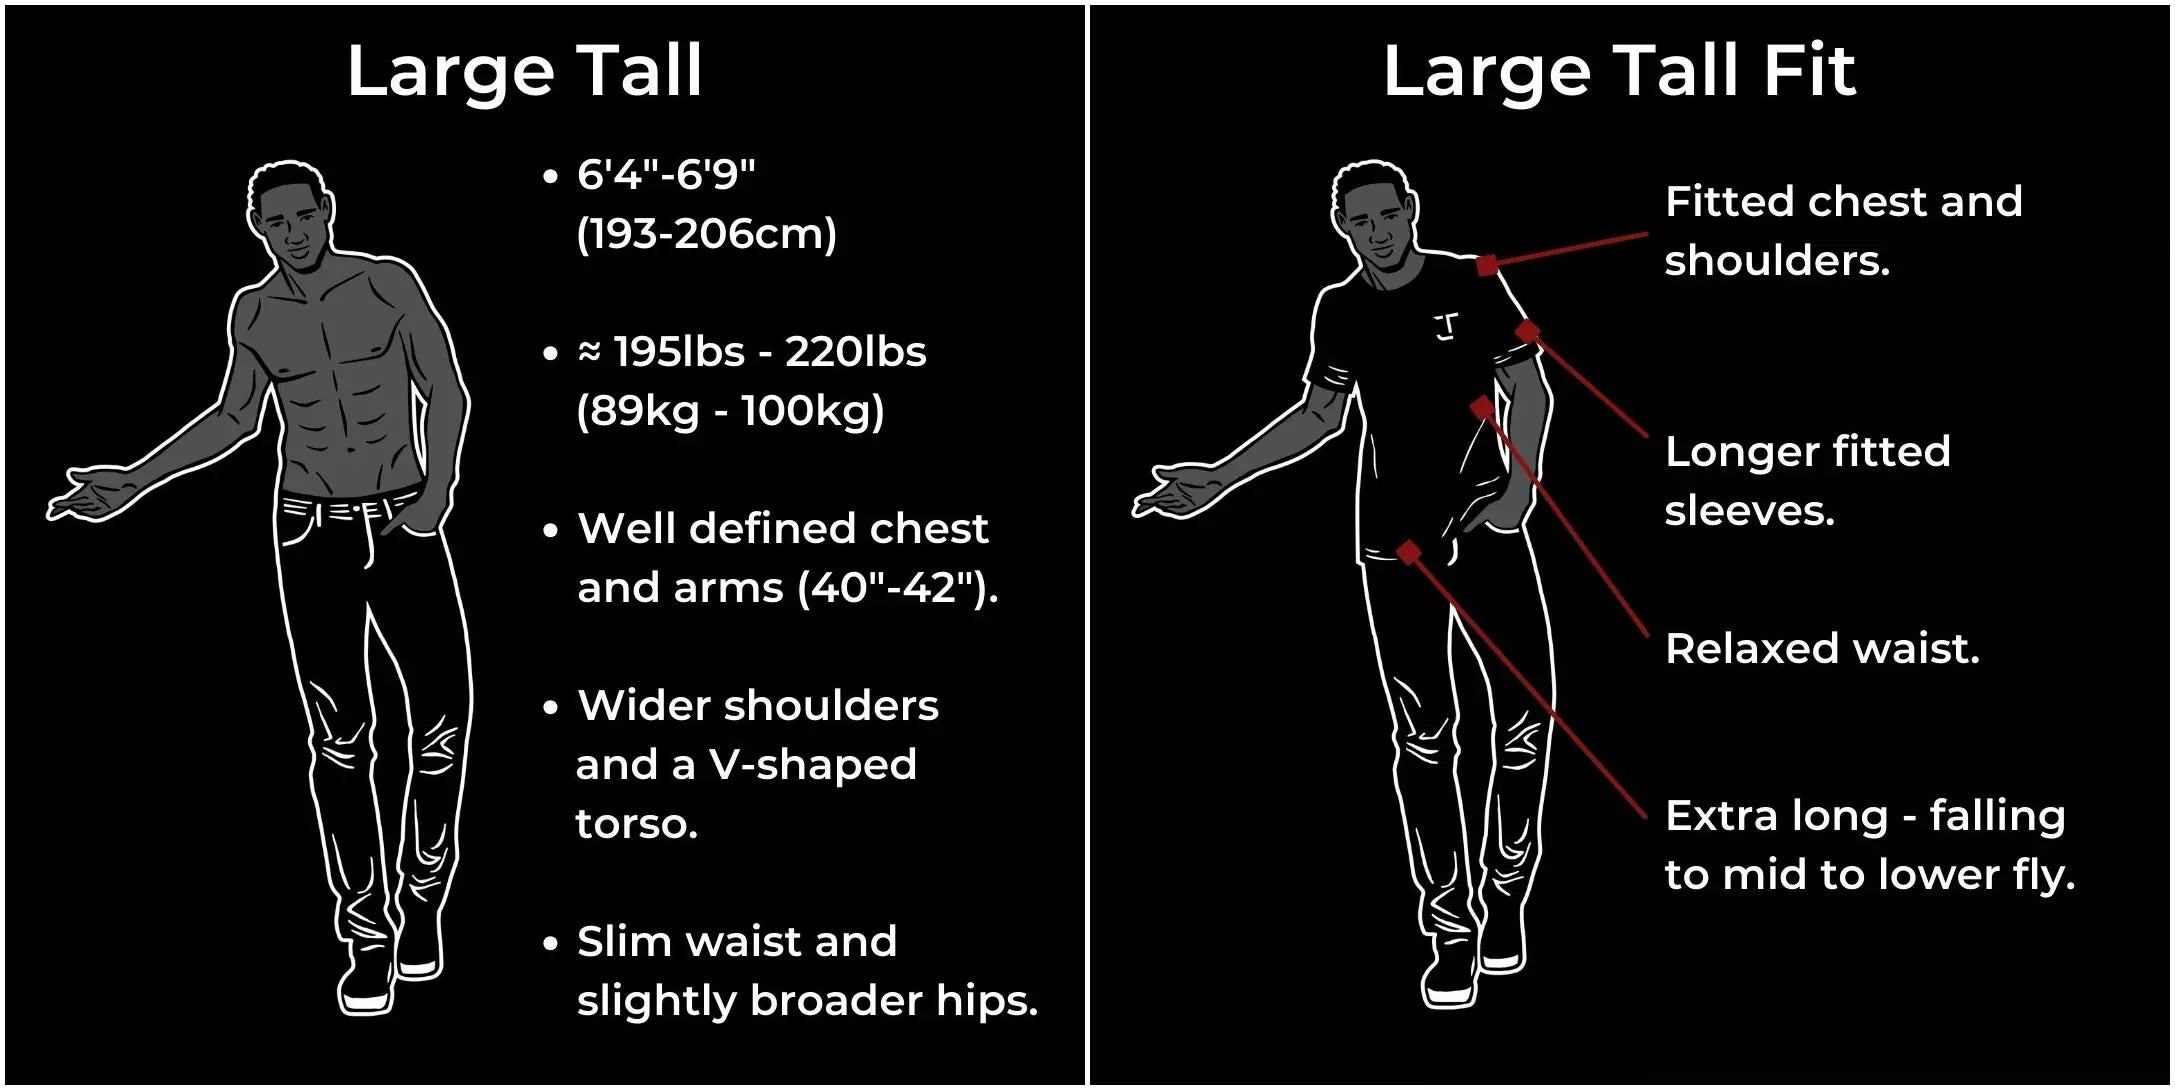 L tall for tall and average/athletic guys 195-220lbs and 6'4"-6'9".